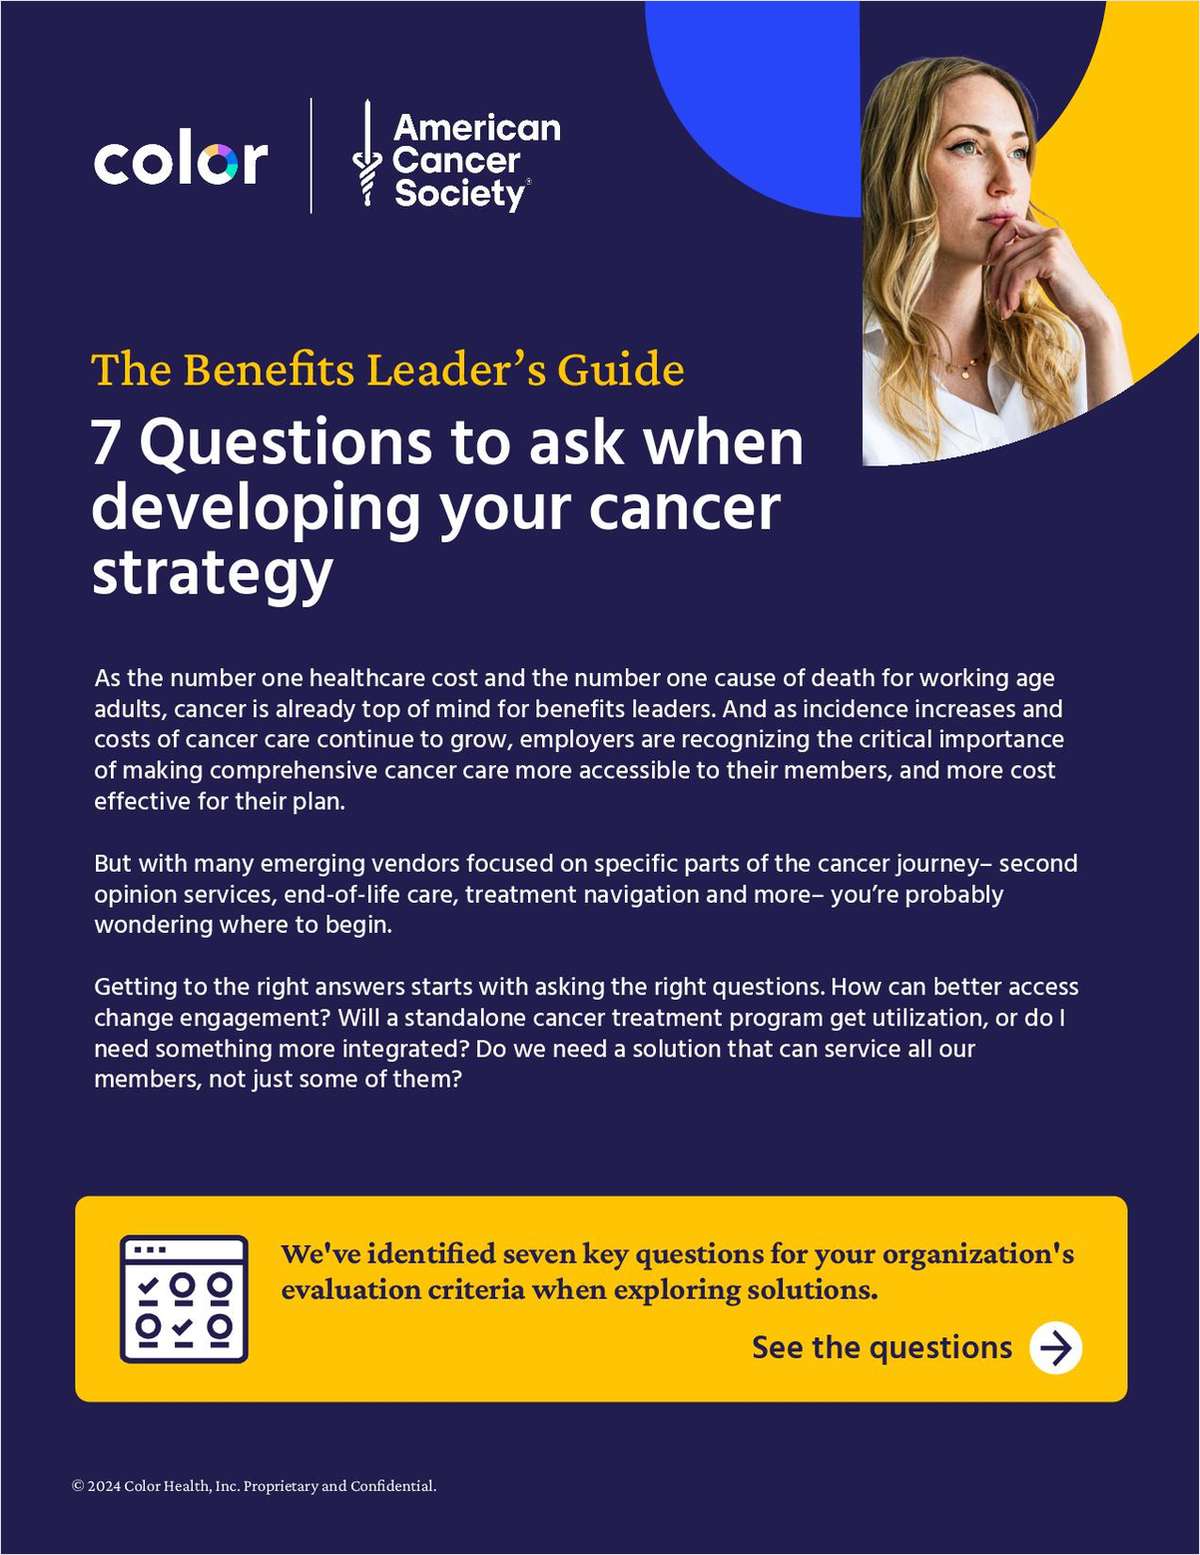 The Benefits Leader's Guide: 7 Questions To Ask When Developing Your Cancer Strategy link